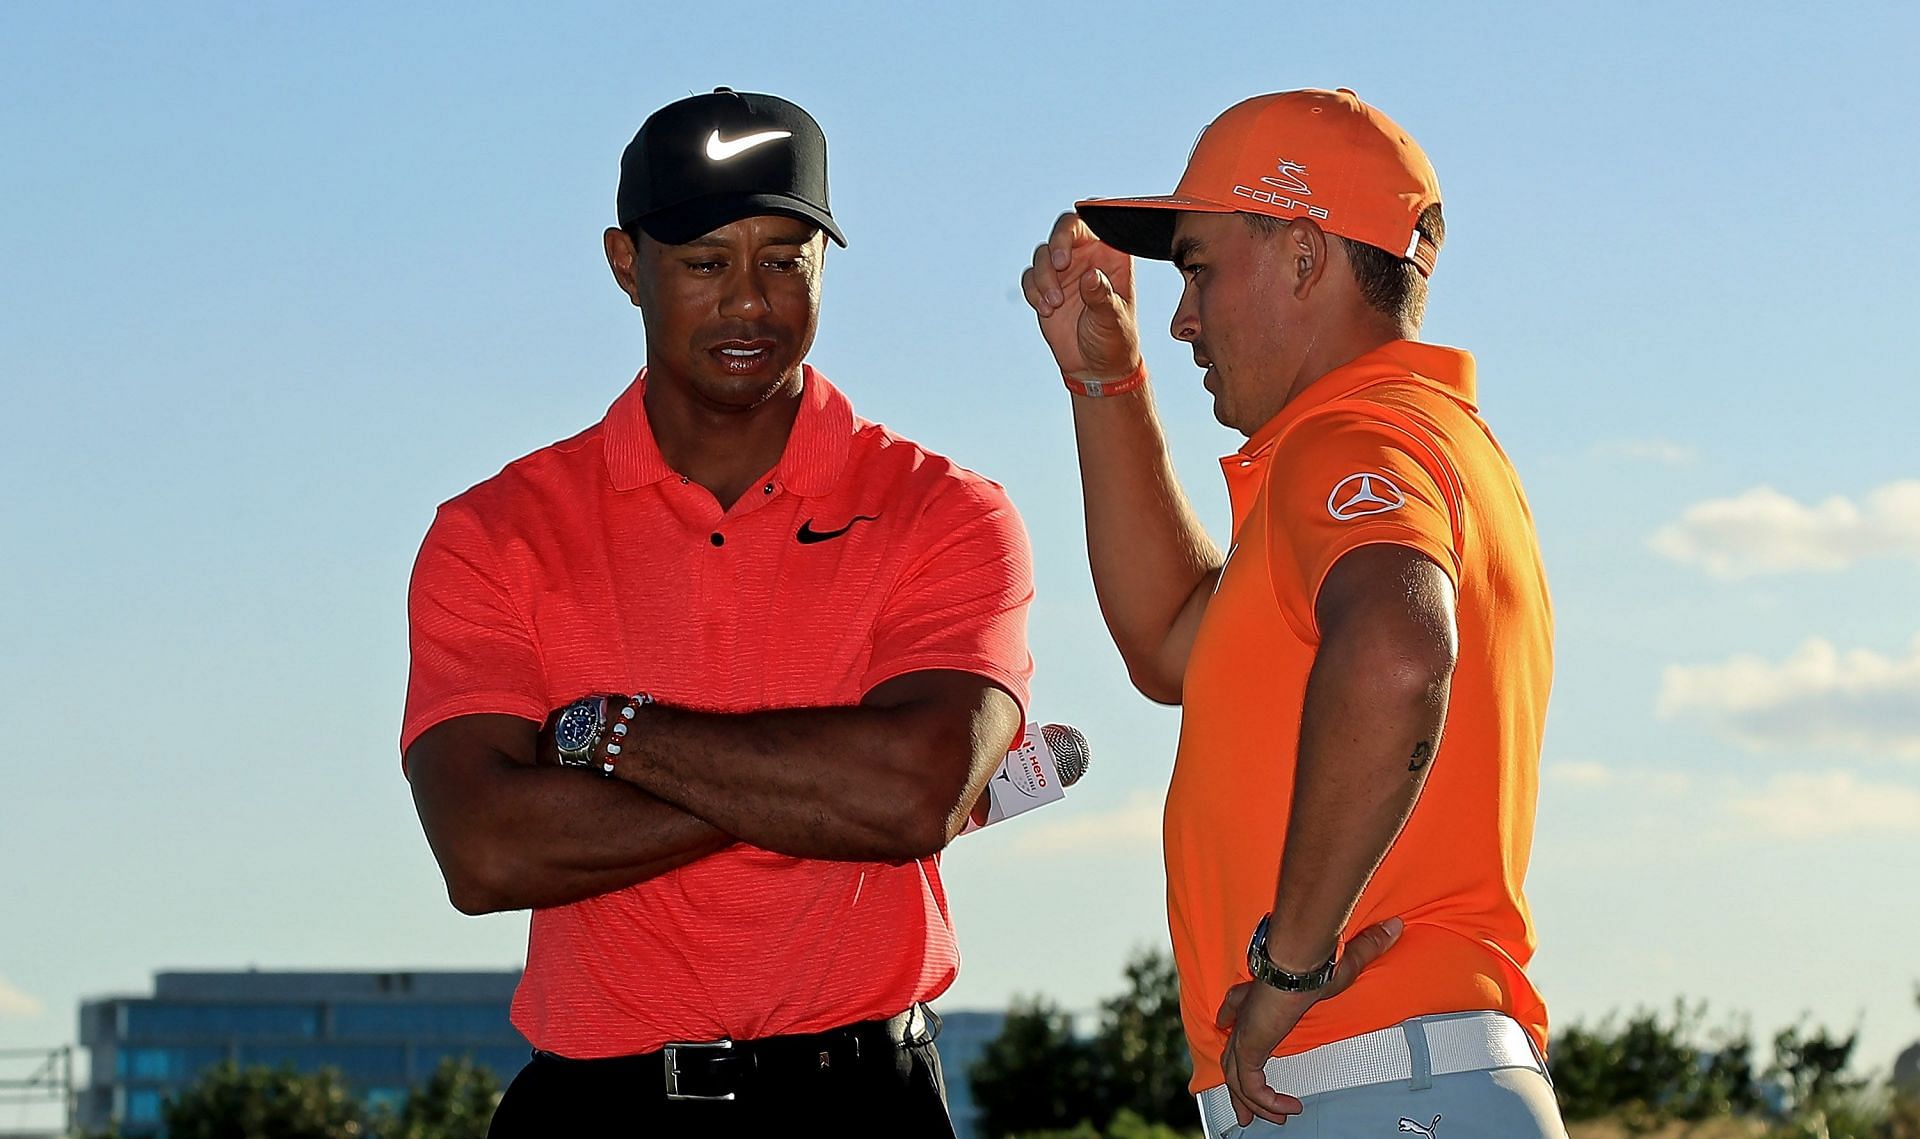 Tiger Woods and Rickie Fowler together